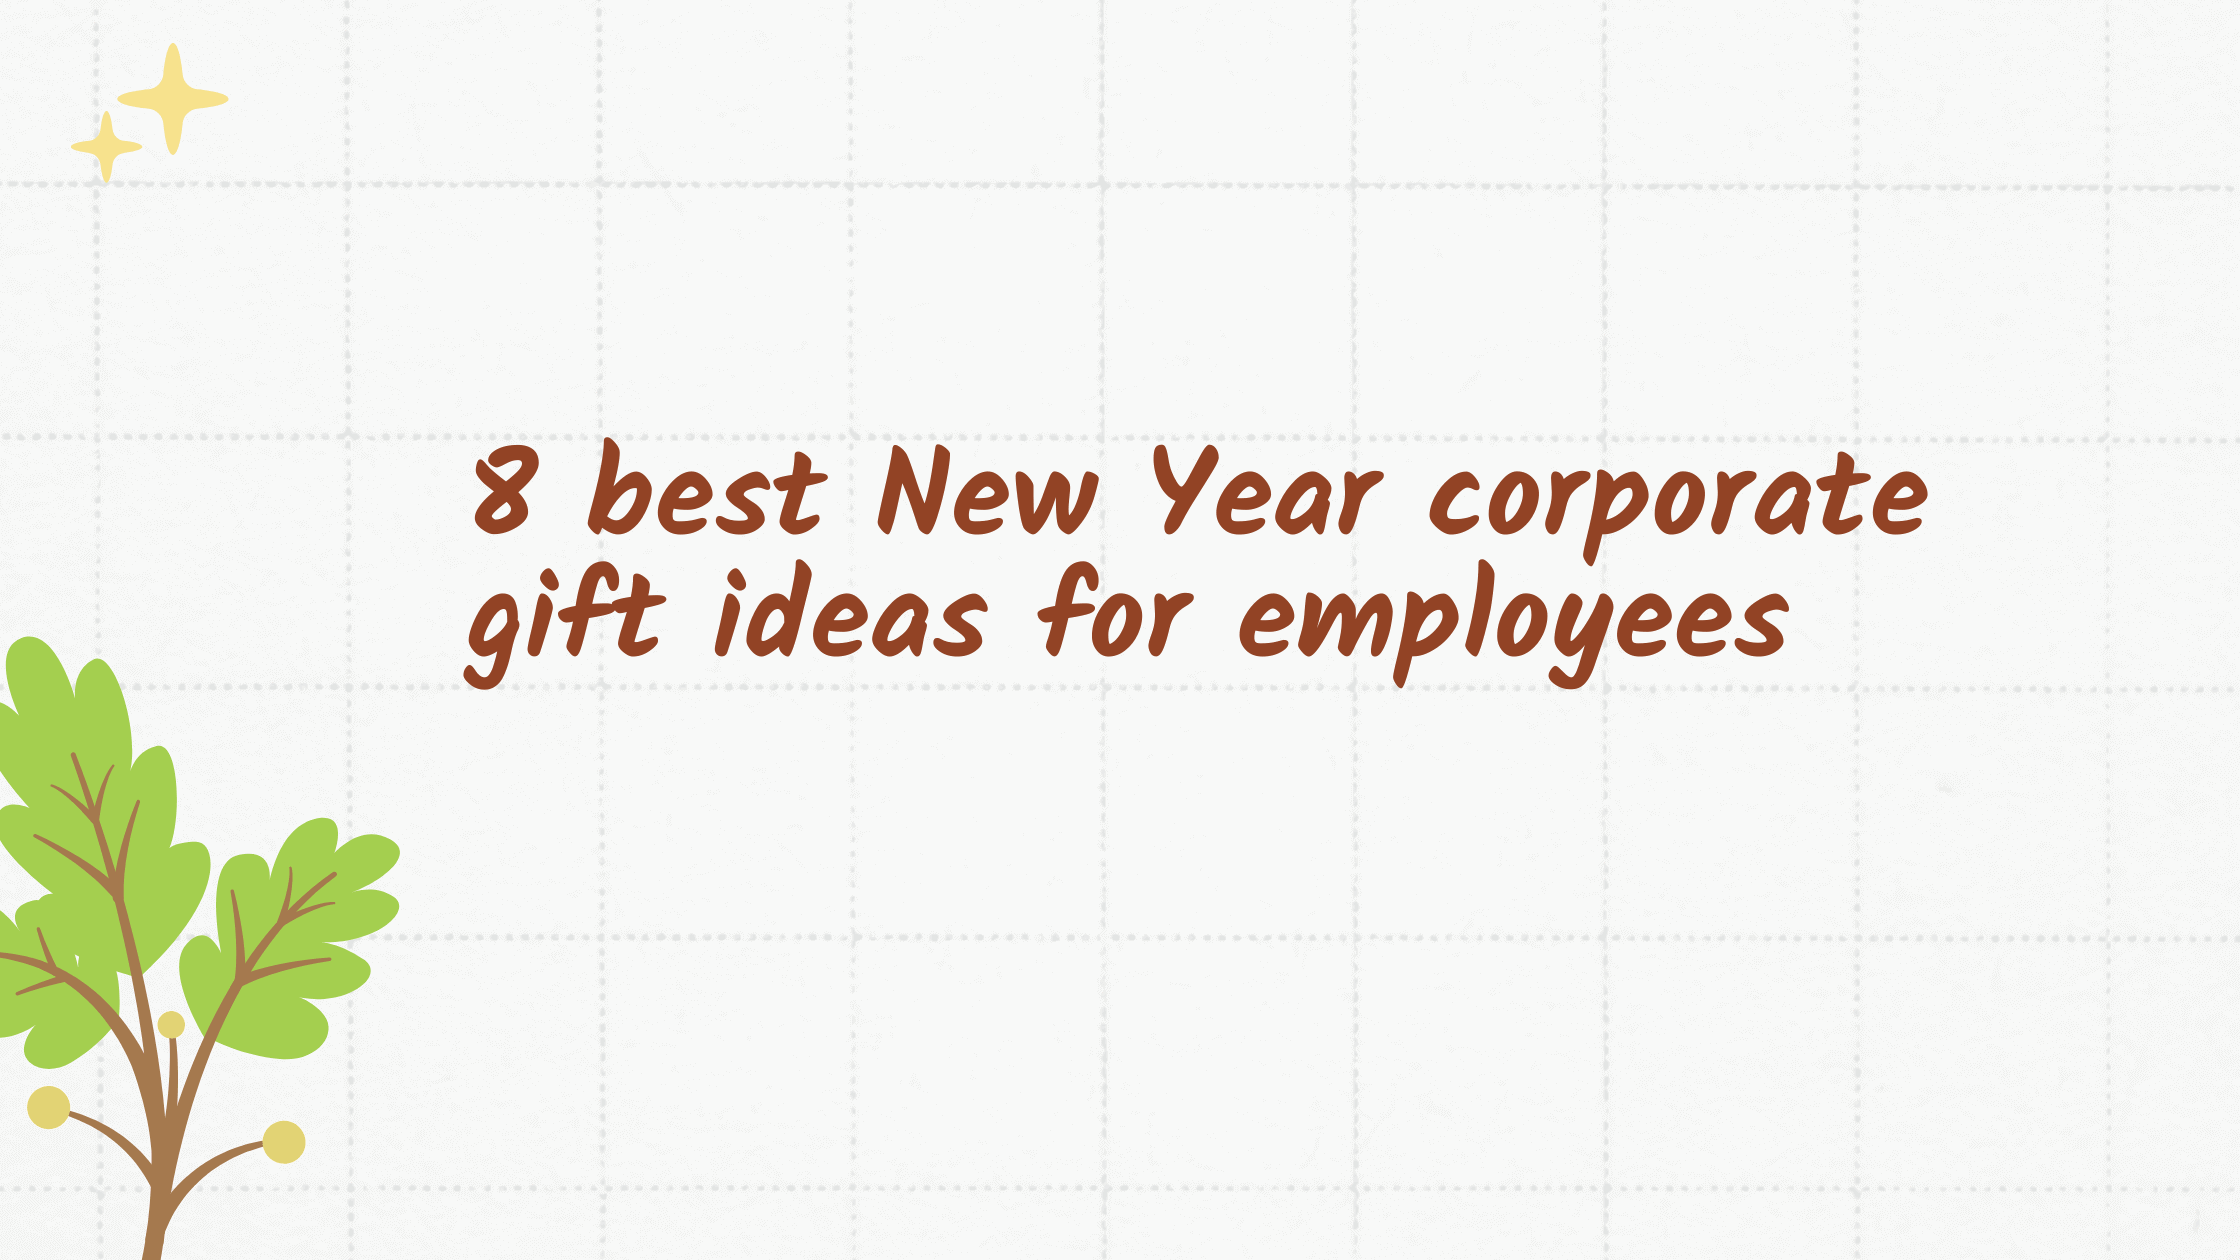 8 best New Year corporate gift ideas for employees